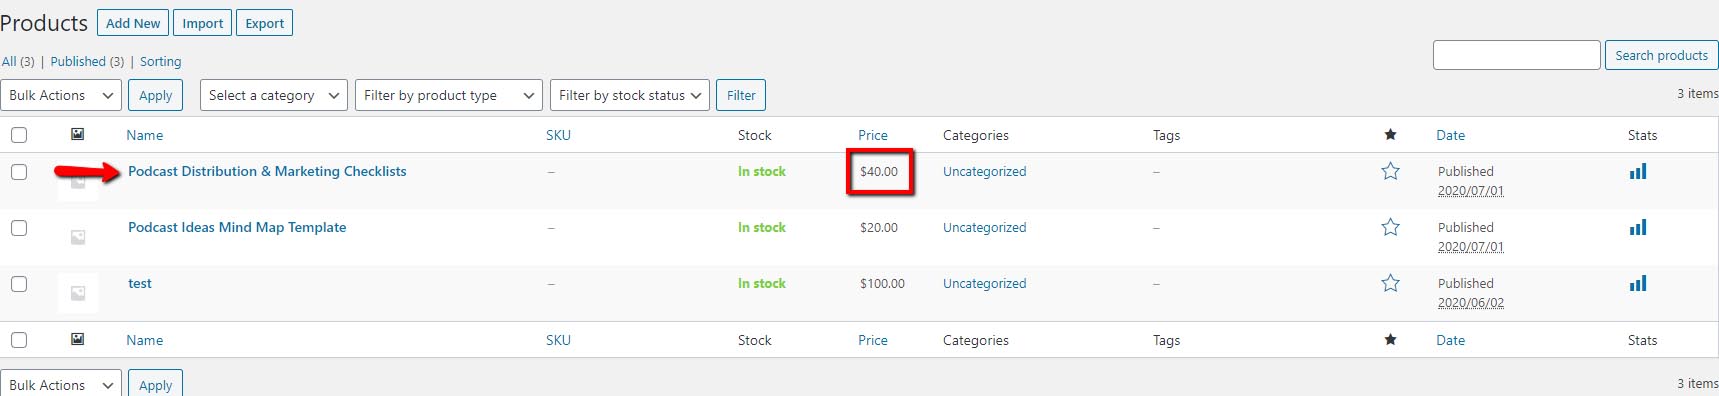 The WooCommerce product with the regular price